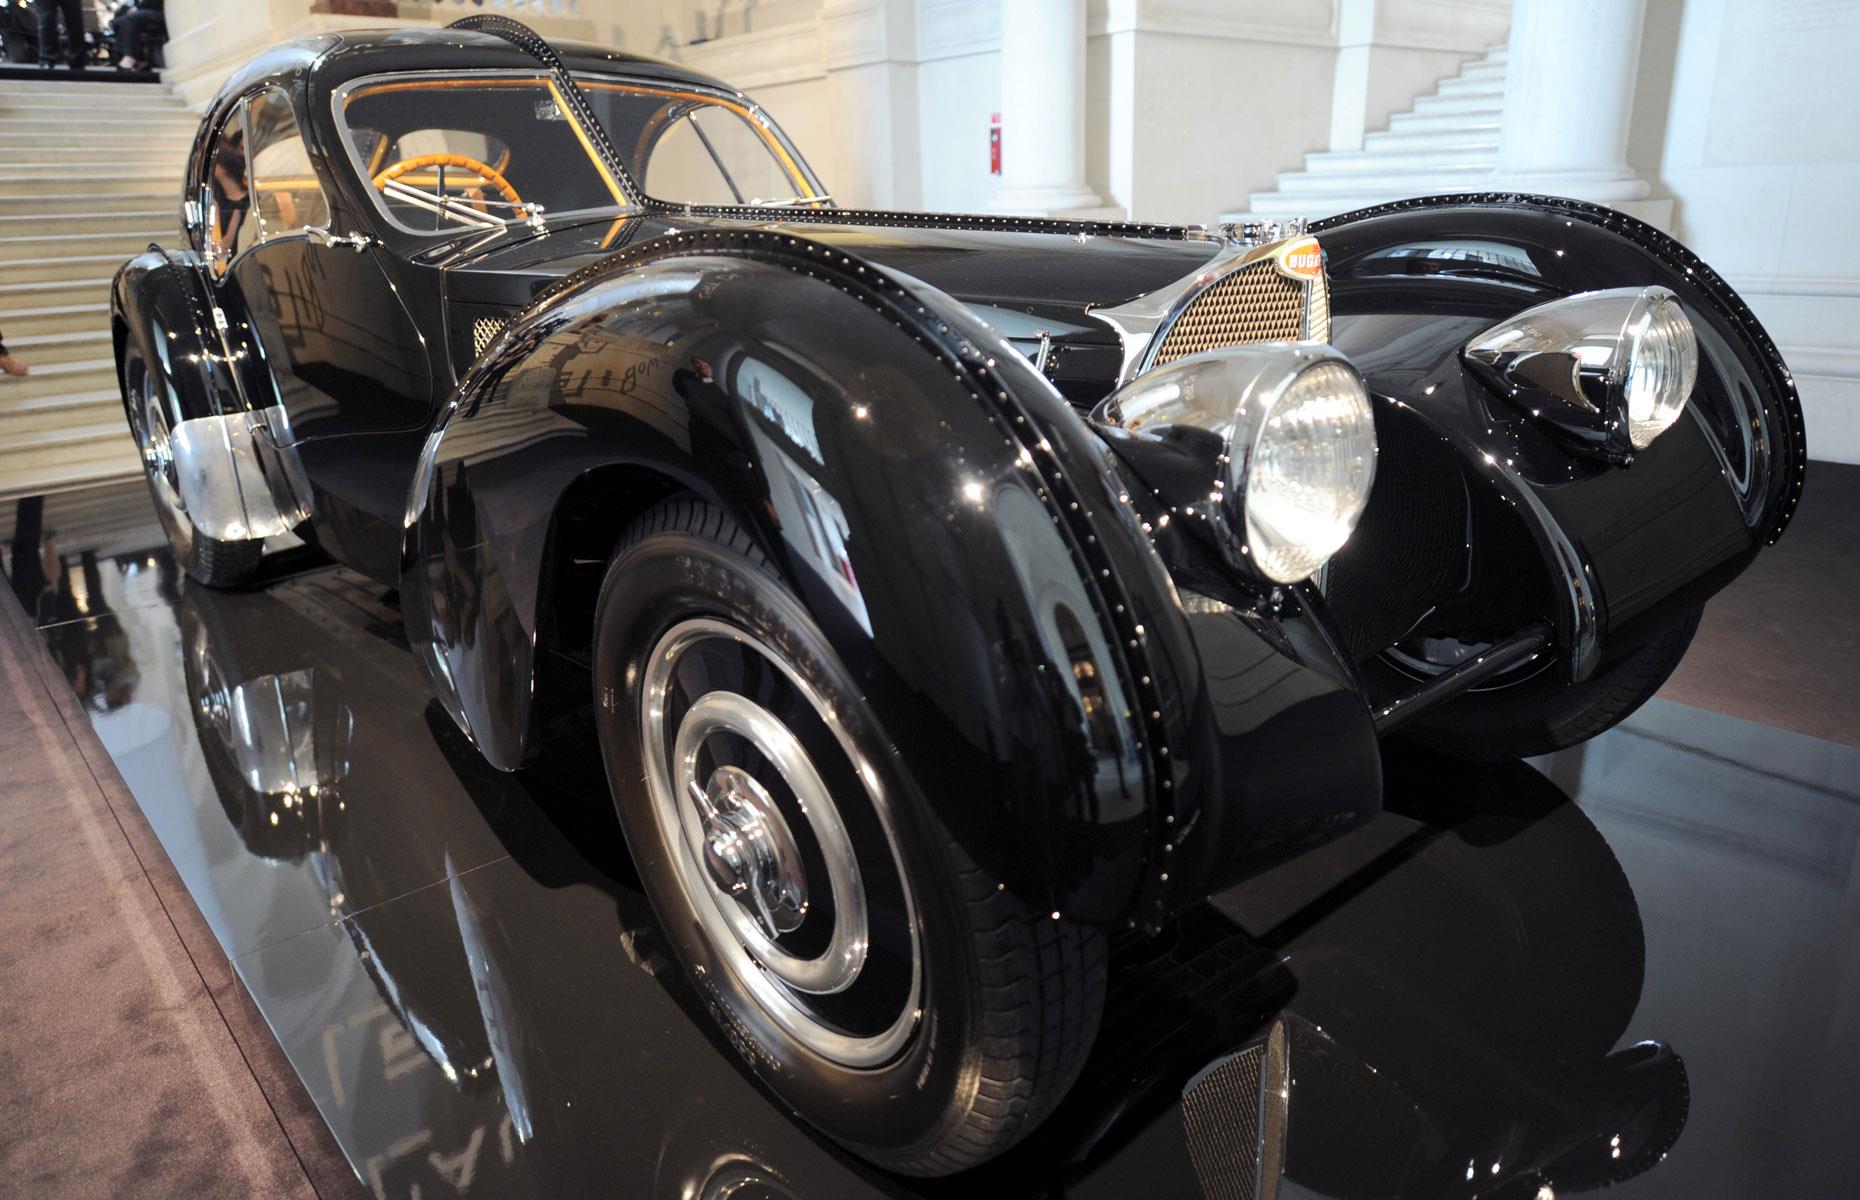 The car that inspired La Voiture Noire is worth considerably more than the 2019 upstart. Indeed the fabled 1938 Bugatti 57SC Atlantic, which is the jewel of Ralph Lauren's collection of prestige vehicles, has a value exceeding $40 million (£28.7m). In total, the billionaire fashion designer owns 60 rare classic cars, including a 1929 Bentley Blower and 1958 Ferrari 250 Testa Rossa.